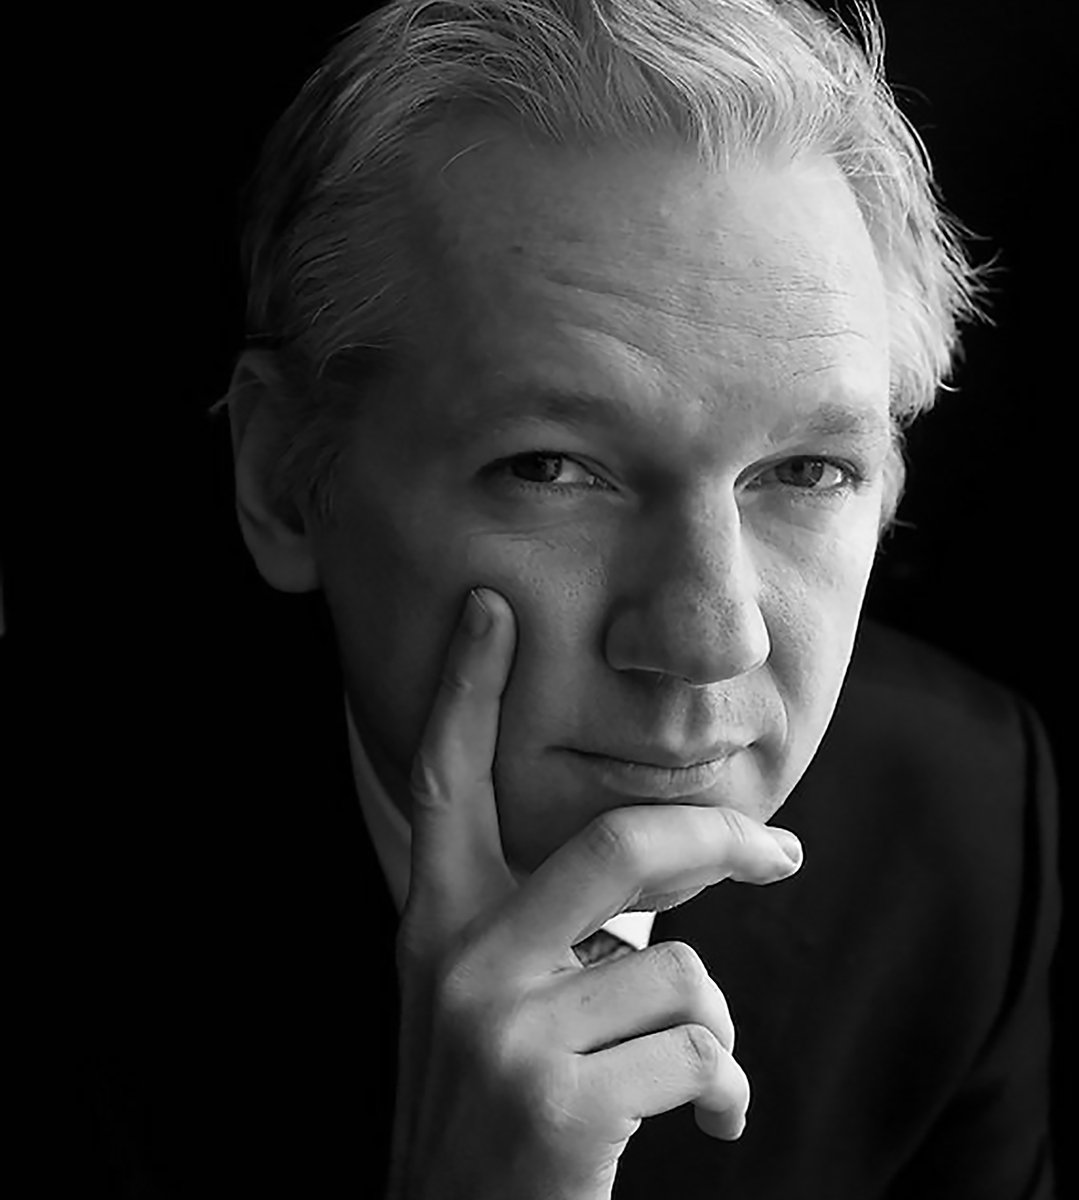 This Is Julian Assange, Born Julian Paul Hawkins, An Australian Editor, Publisher, And Activist Who Founded WikiLeaks In 2006, Roughly Ten Years Before Donald J. Trump Announces His Run For The U.S. Presidency.